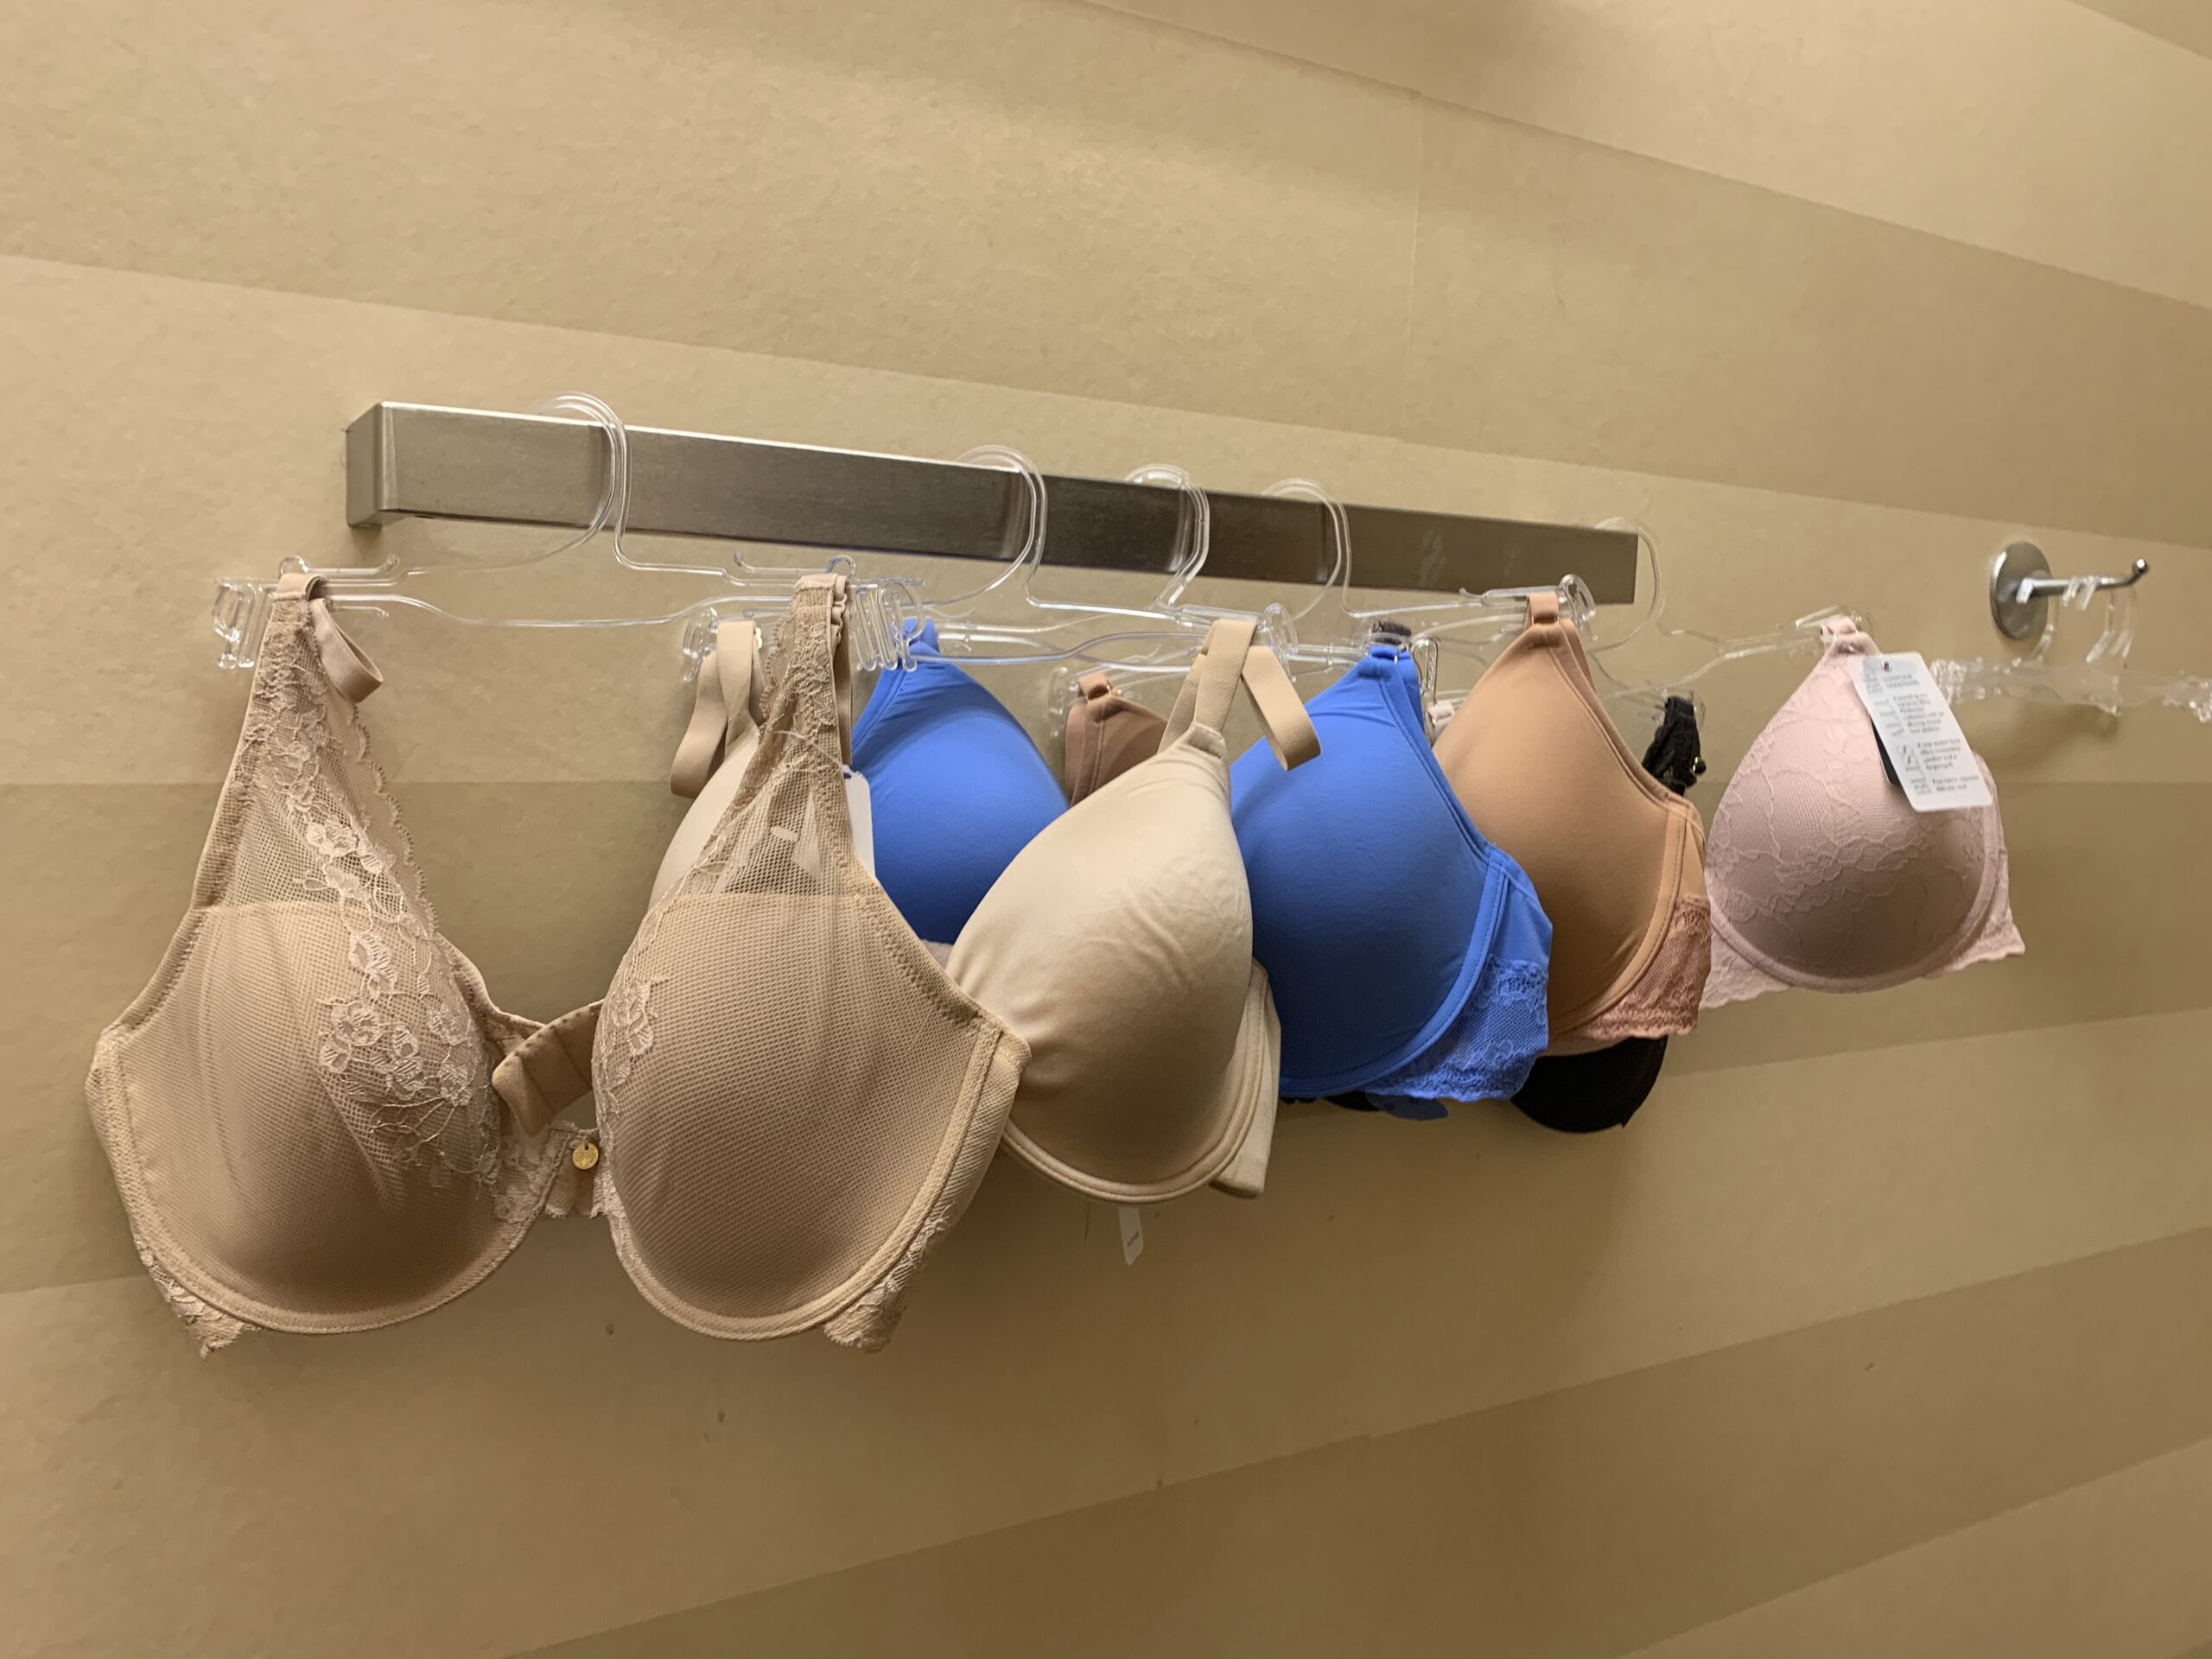 The Ultimate Bra Fitting Experience With Professional Bra Fitter In 2021